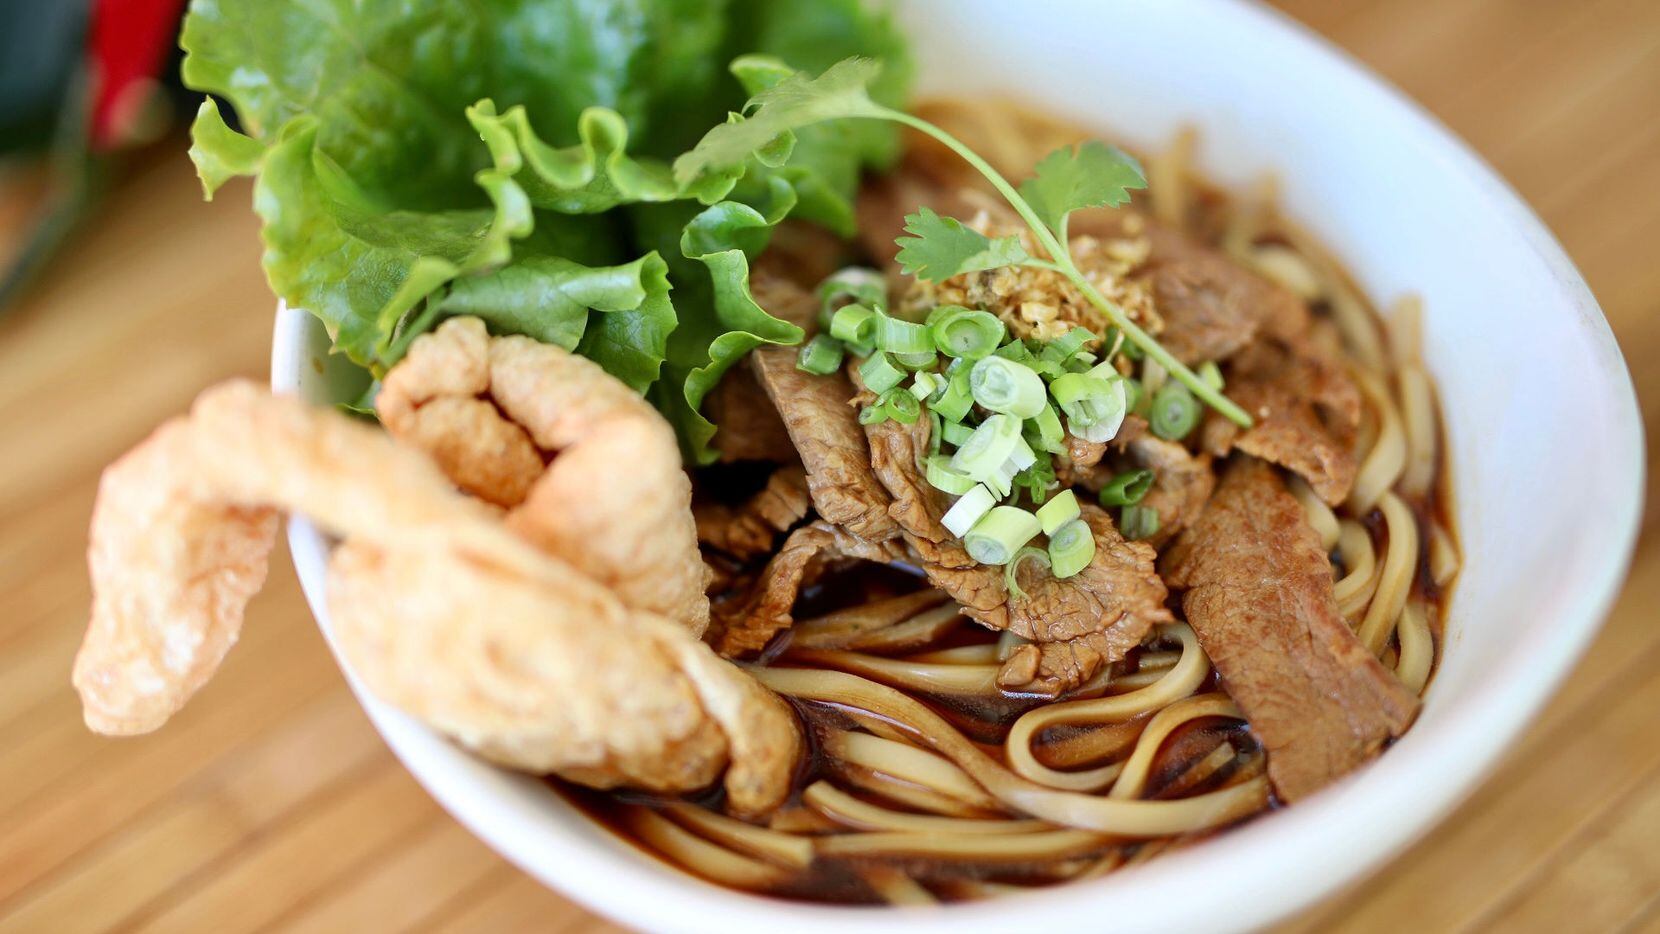 With the new restaurant, Asian Mint will have five locations serving Thai favorites such as...